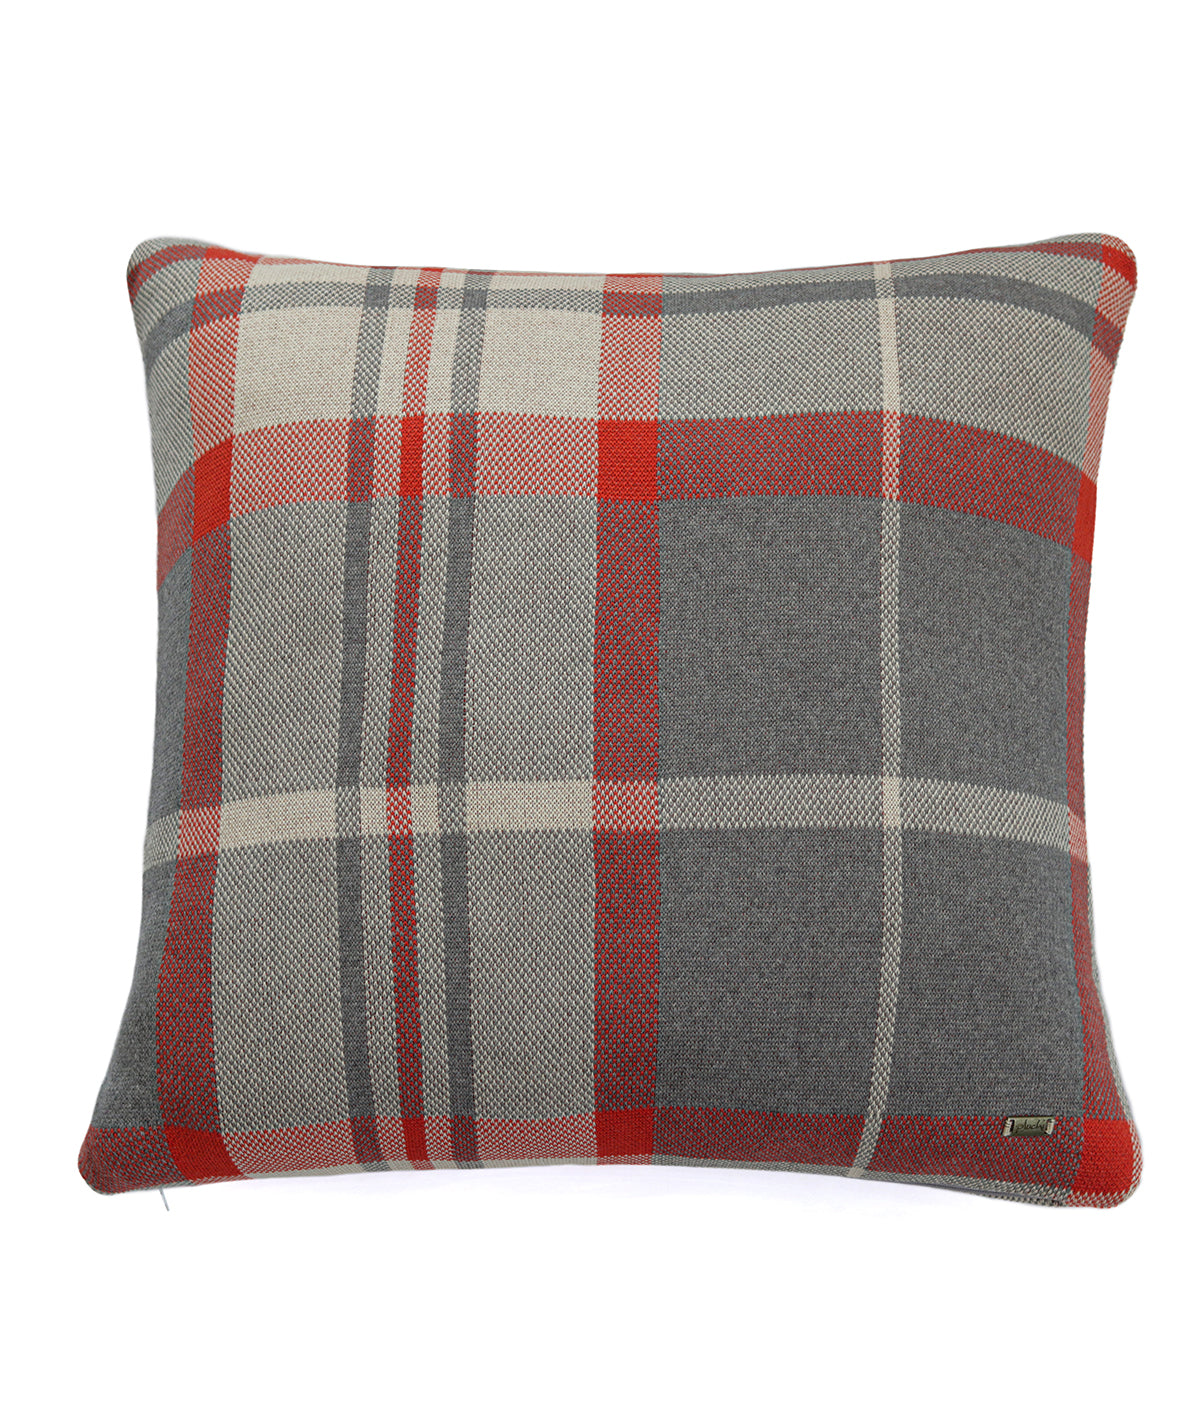 Lil' Accuma Cotton Knitted Cushion Cover( Red And Natural) (18" x 18")